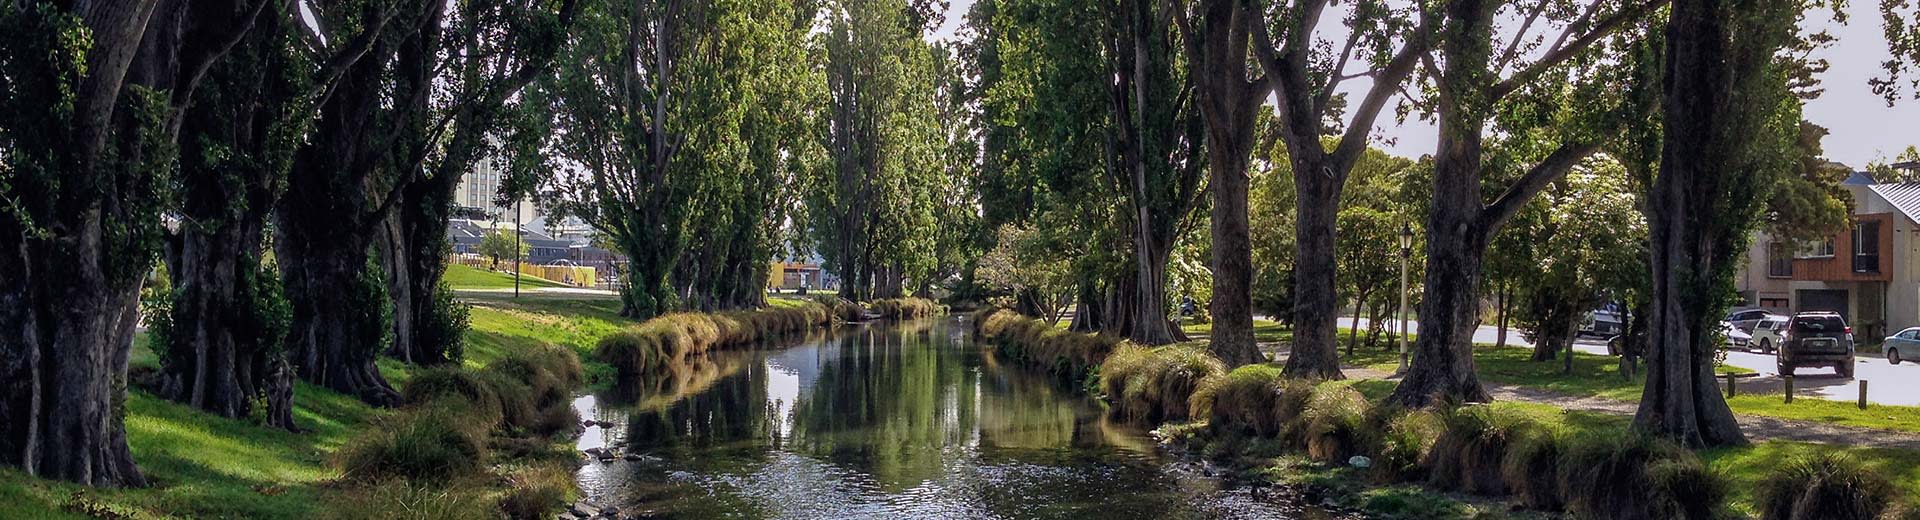 An idyllic canal surrounded by trees in Christchurch.